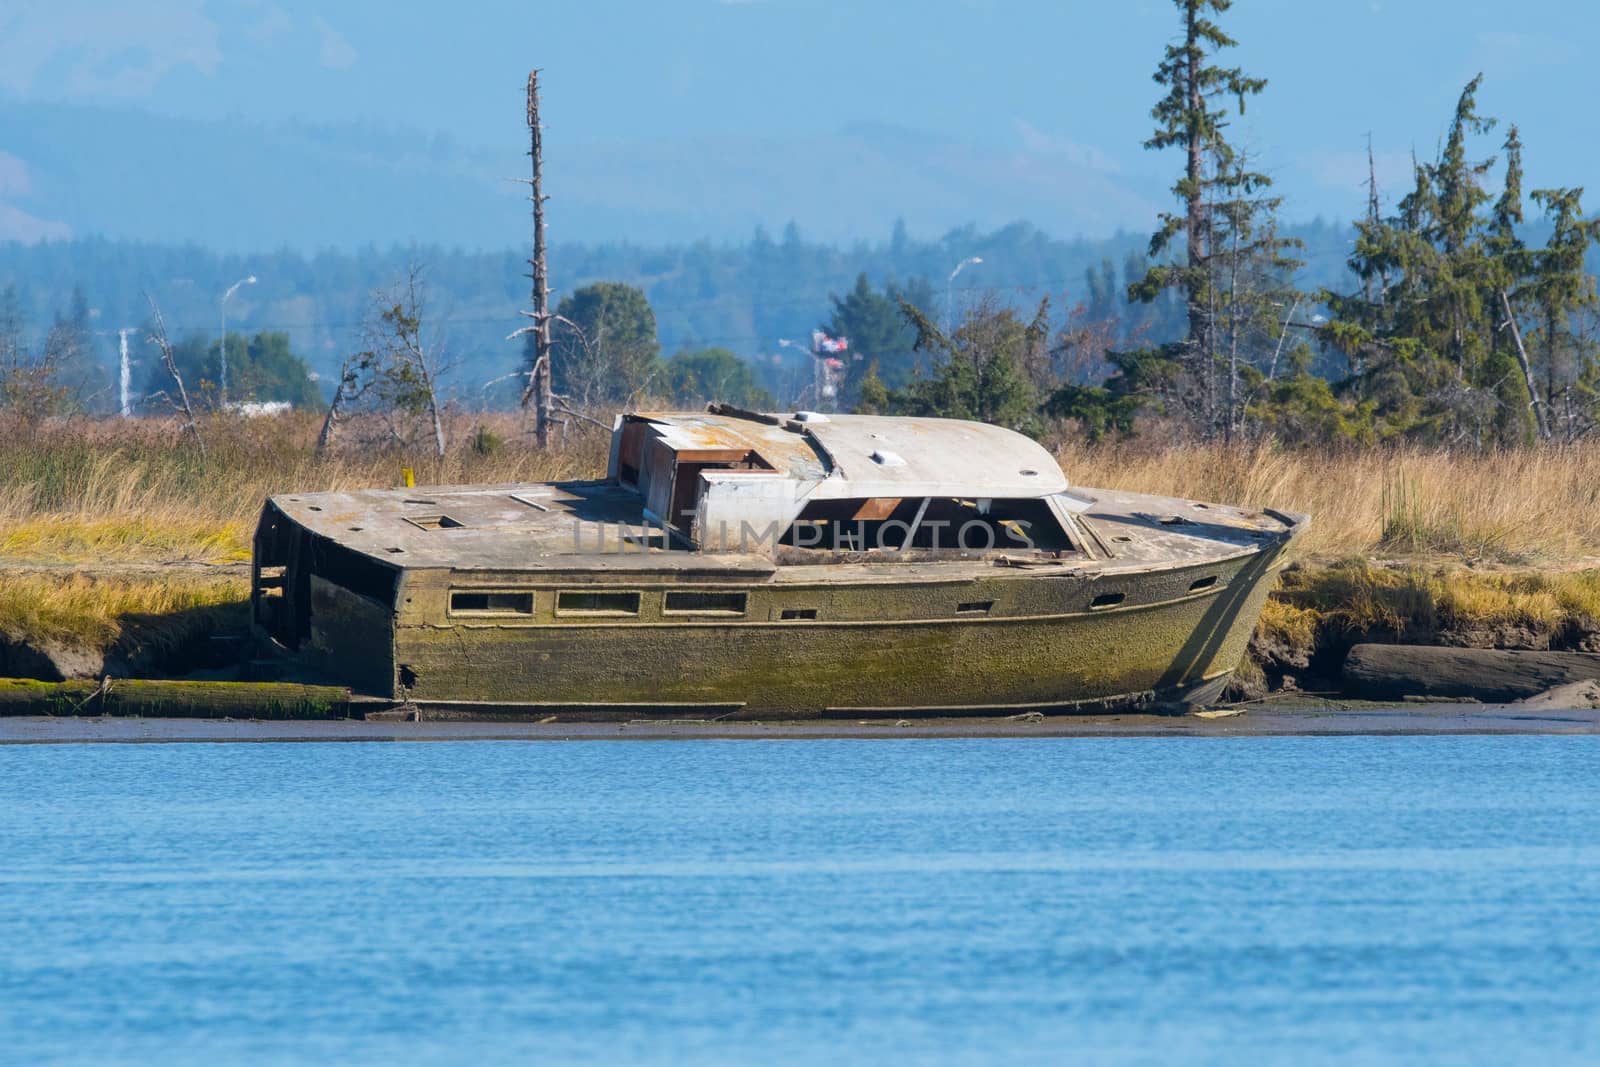 Derelict Vessel on Steamboat Slough by cestes001